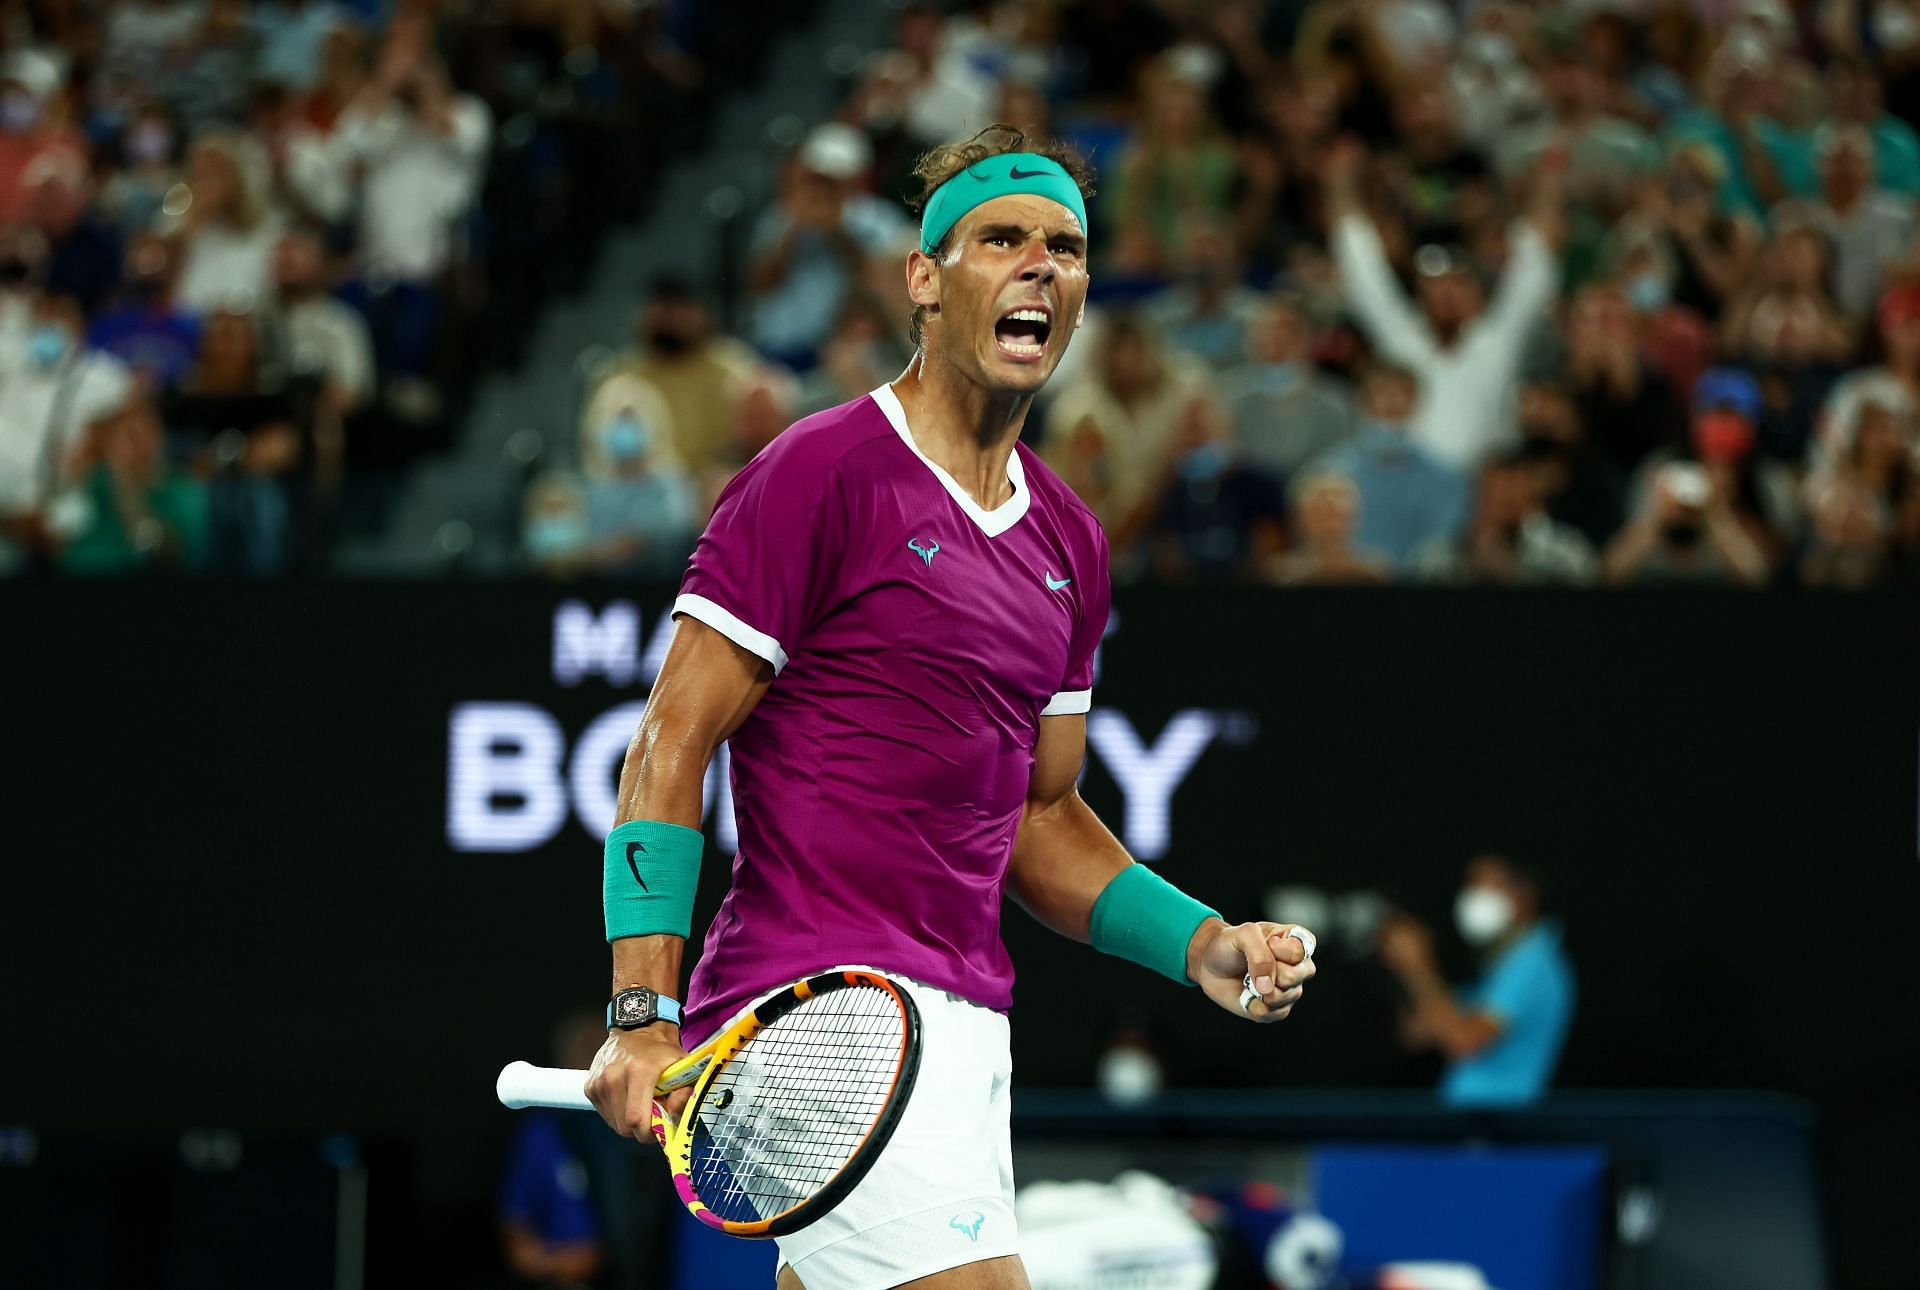 Rafael Nadal faces Tommy Paul in the quarterfinals in Acapulco